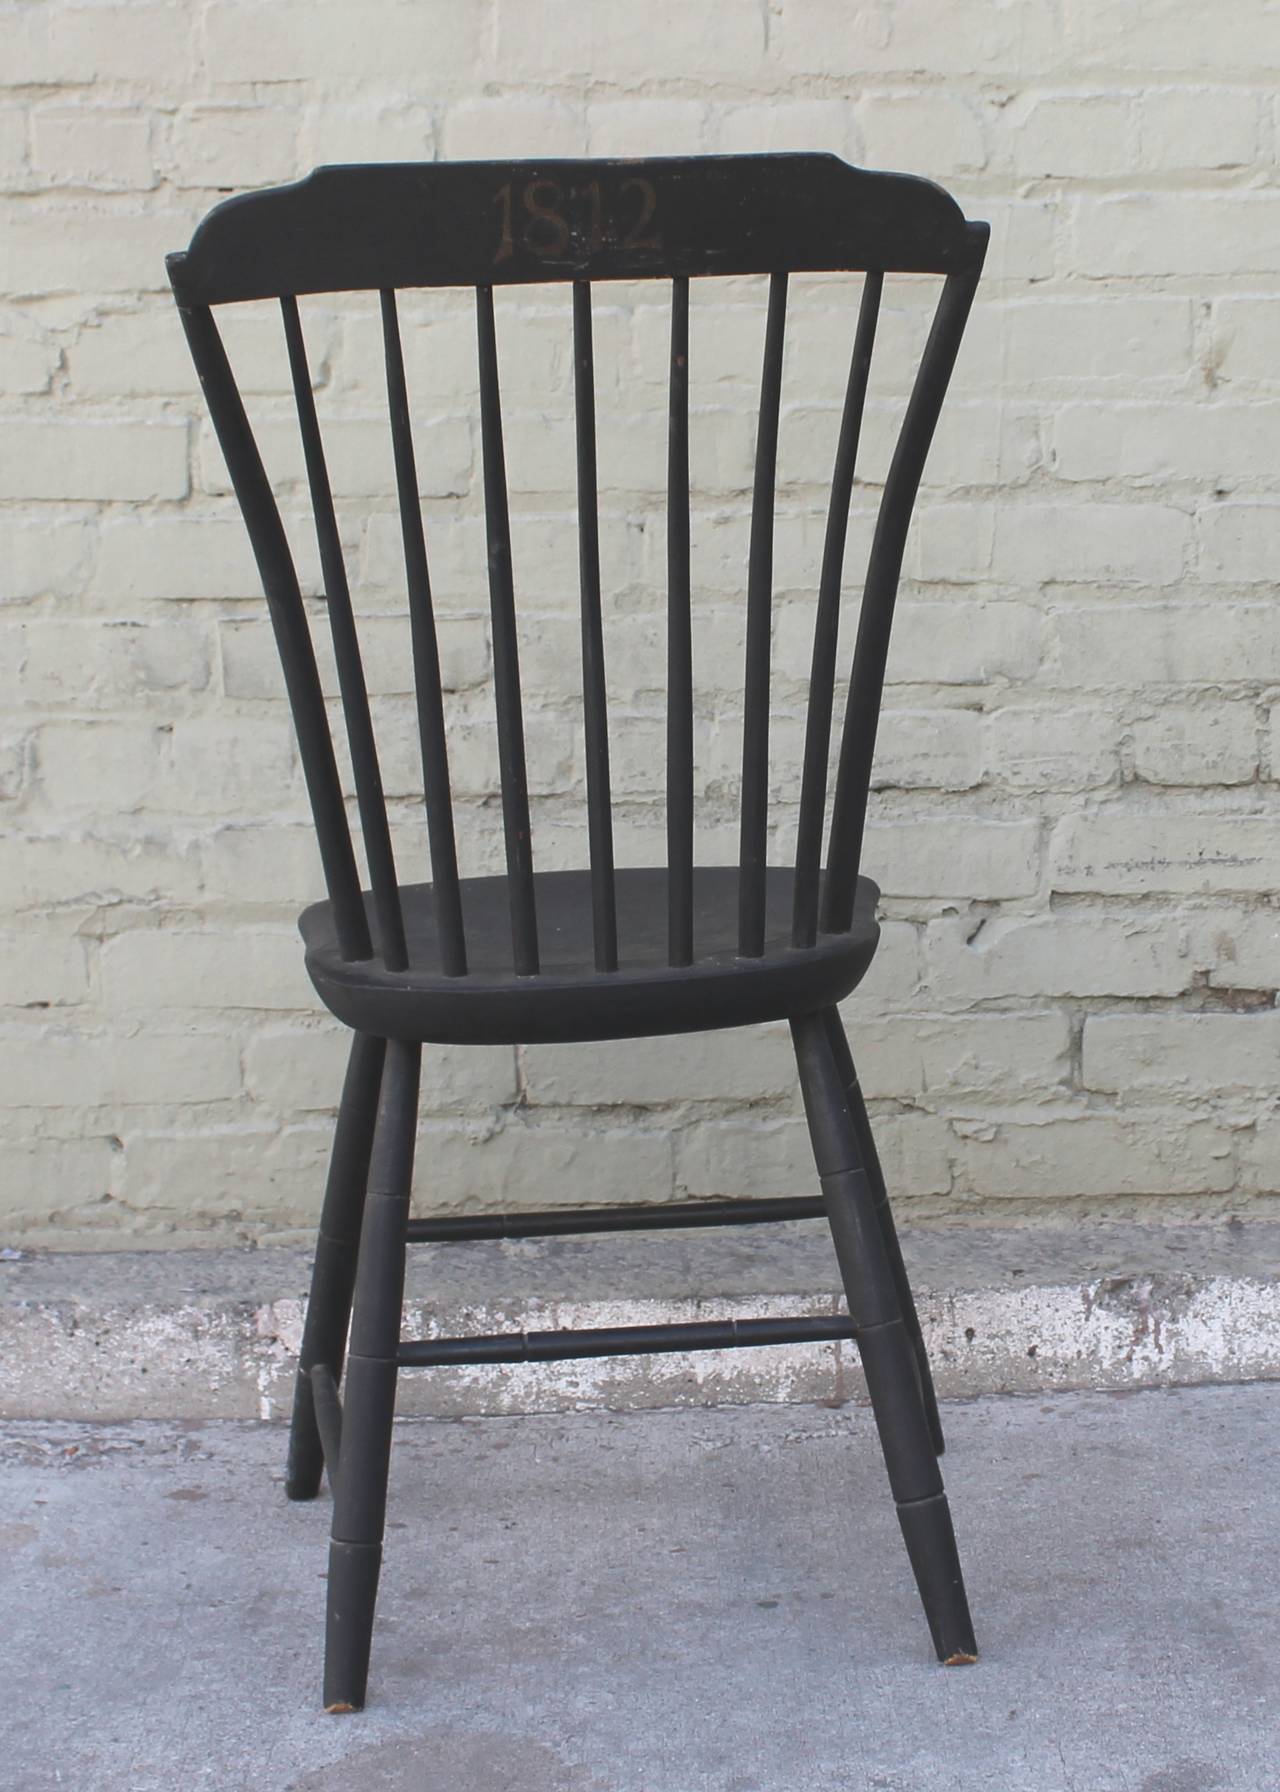 Early 19th Century Original Black Painted Step Down New England Windsor Chair, Dated 1812 For Sale